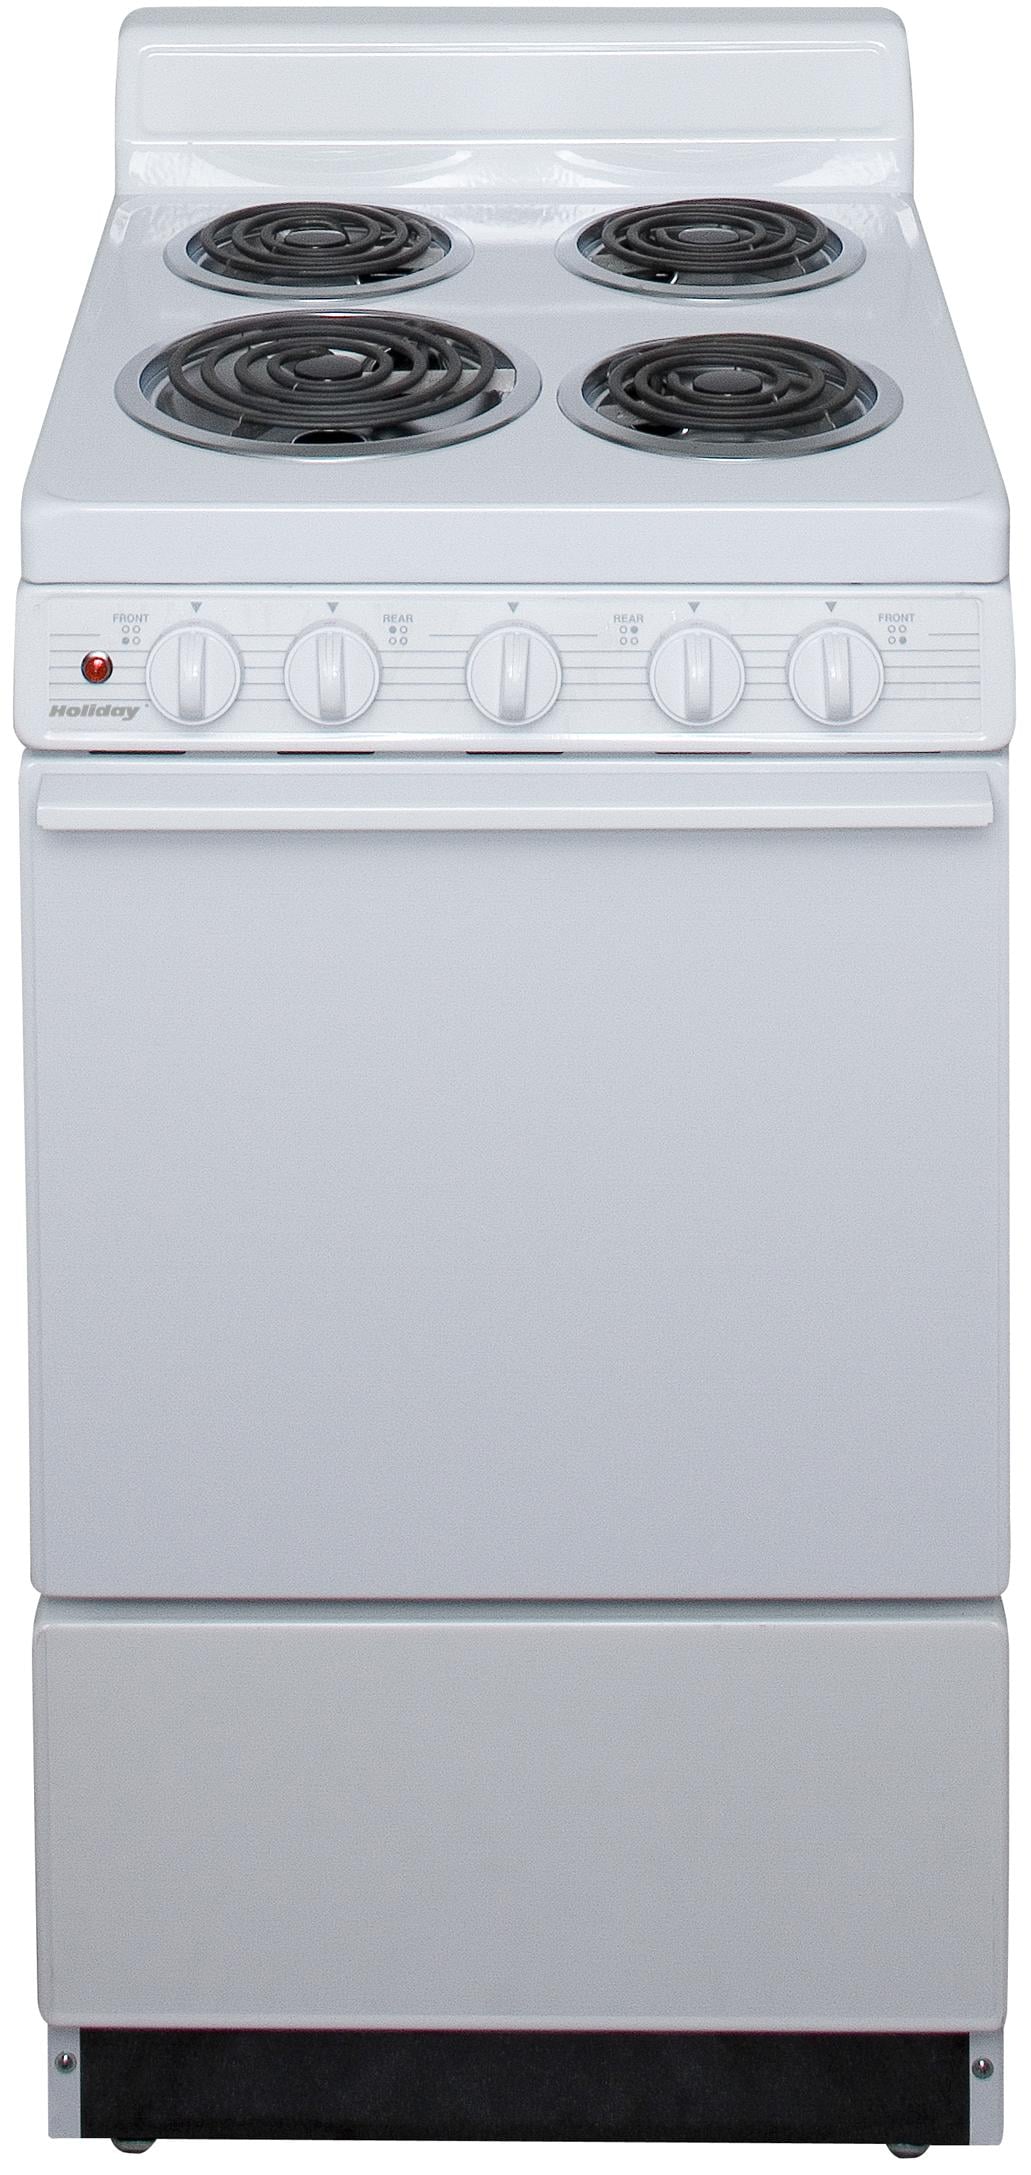 How to compute the breaker size for an electric stove and an oven